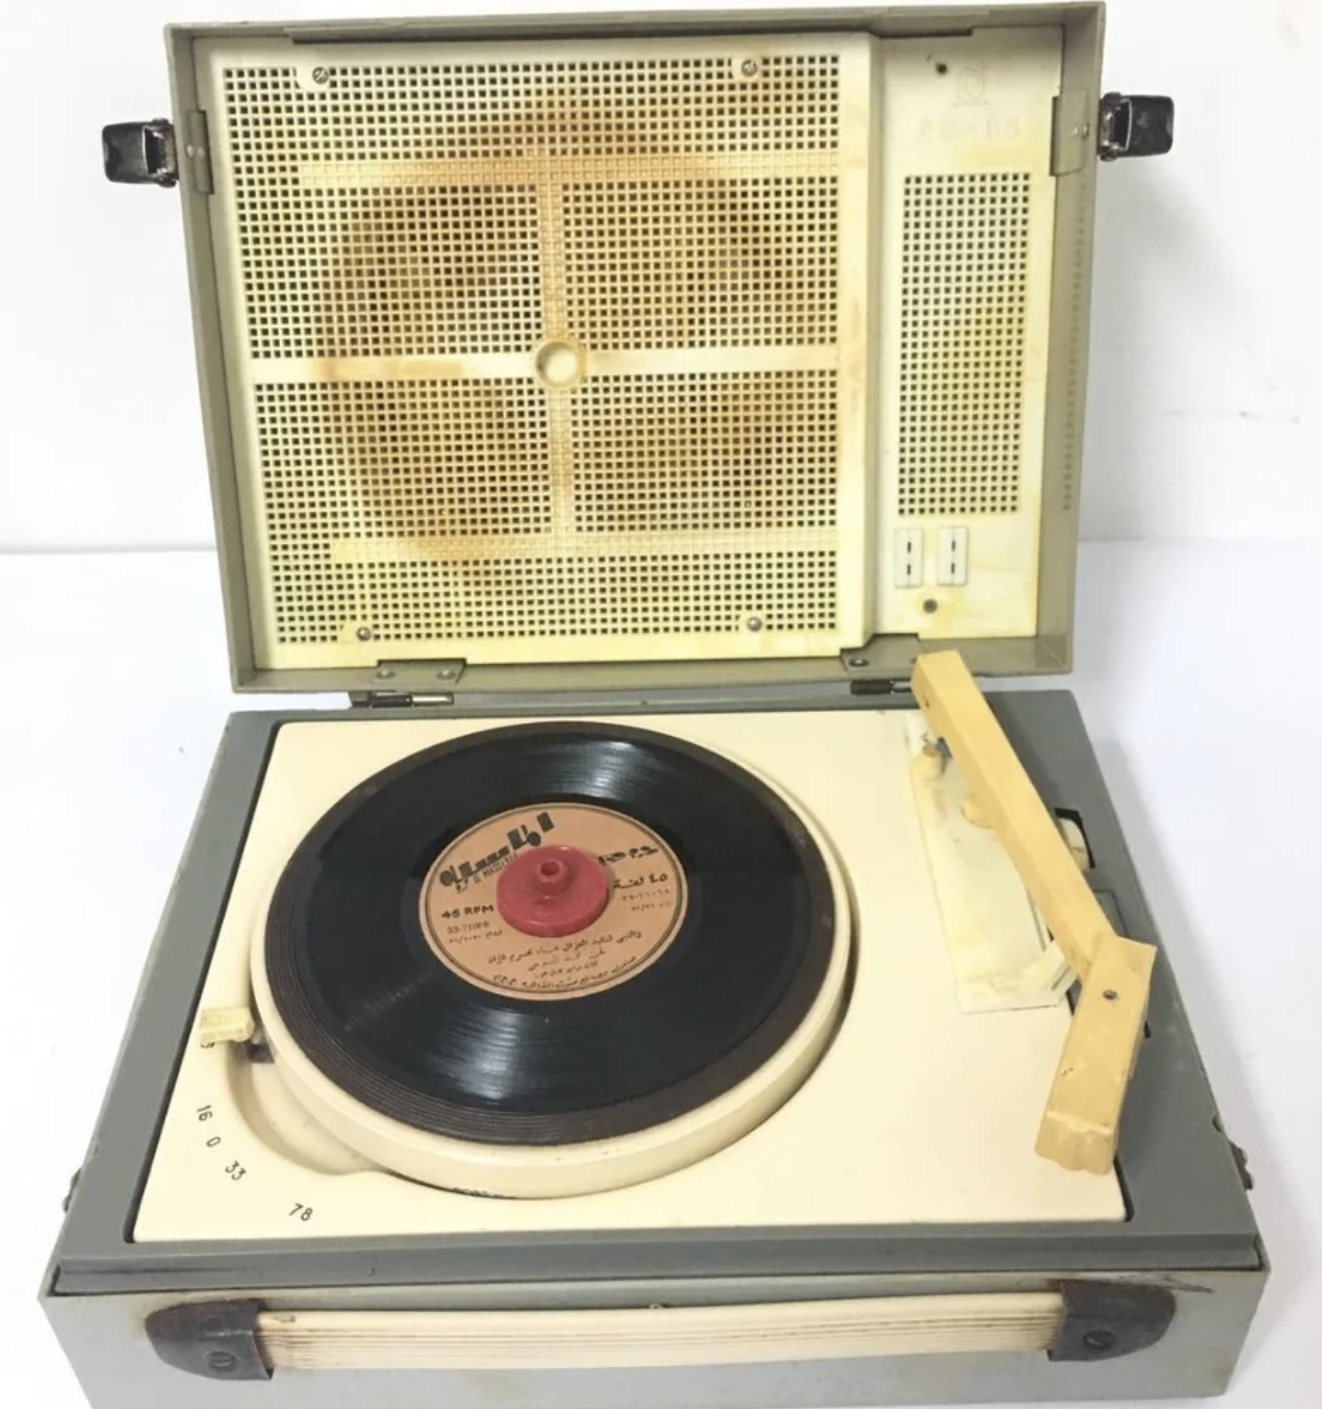 An old record player is being displayed